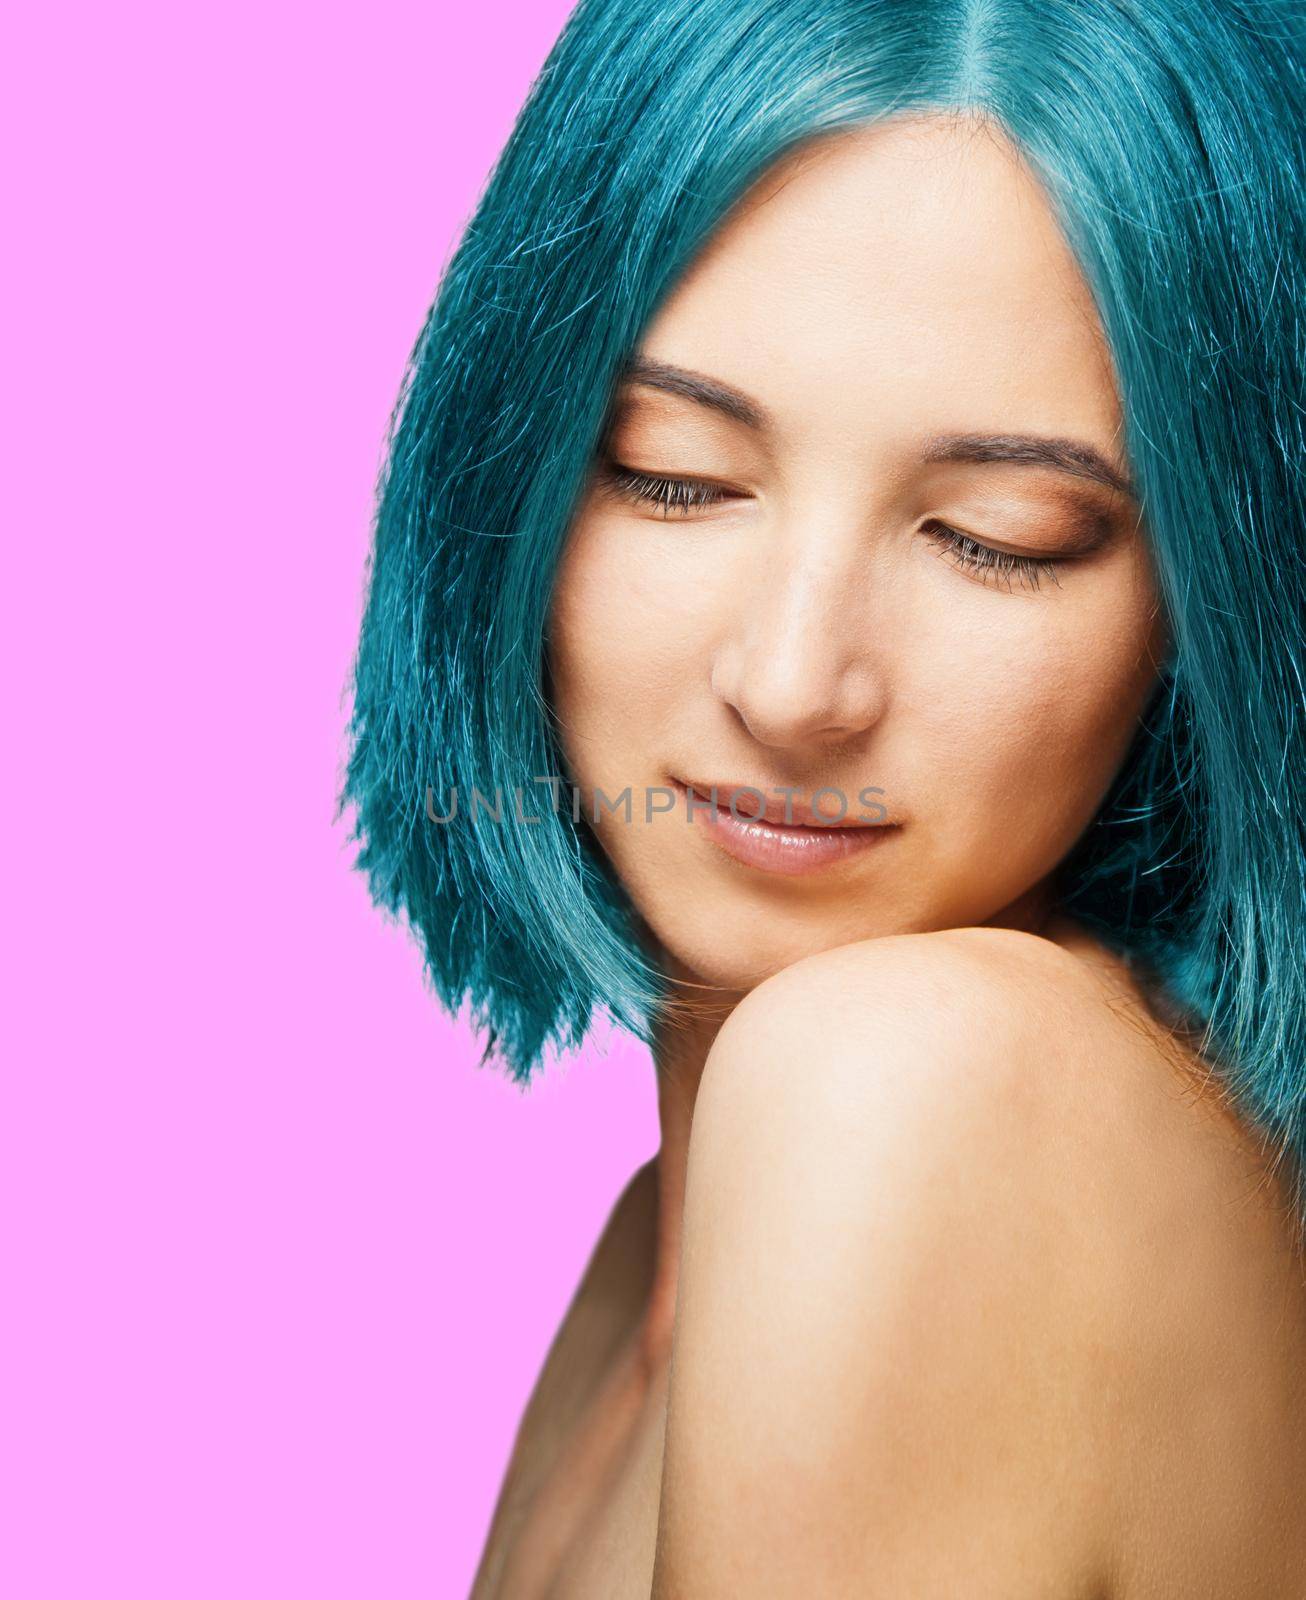 Young attractive woman with blue hairstyle and makeup on pink background